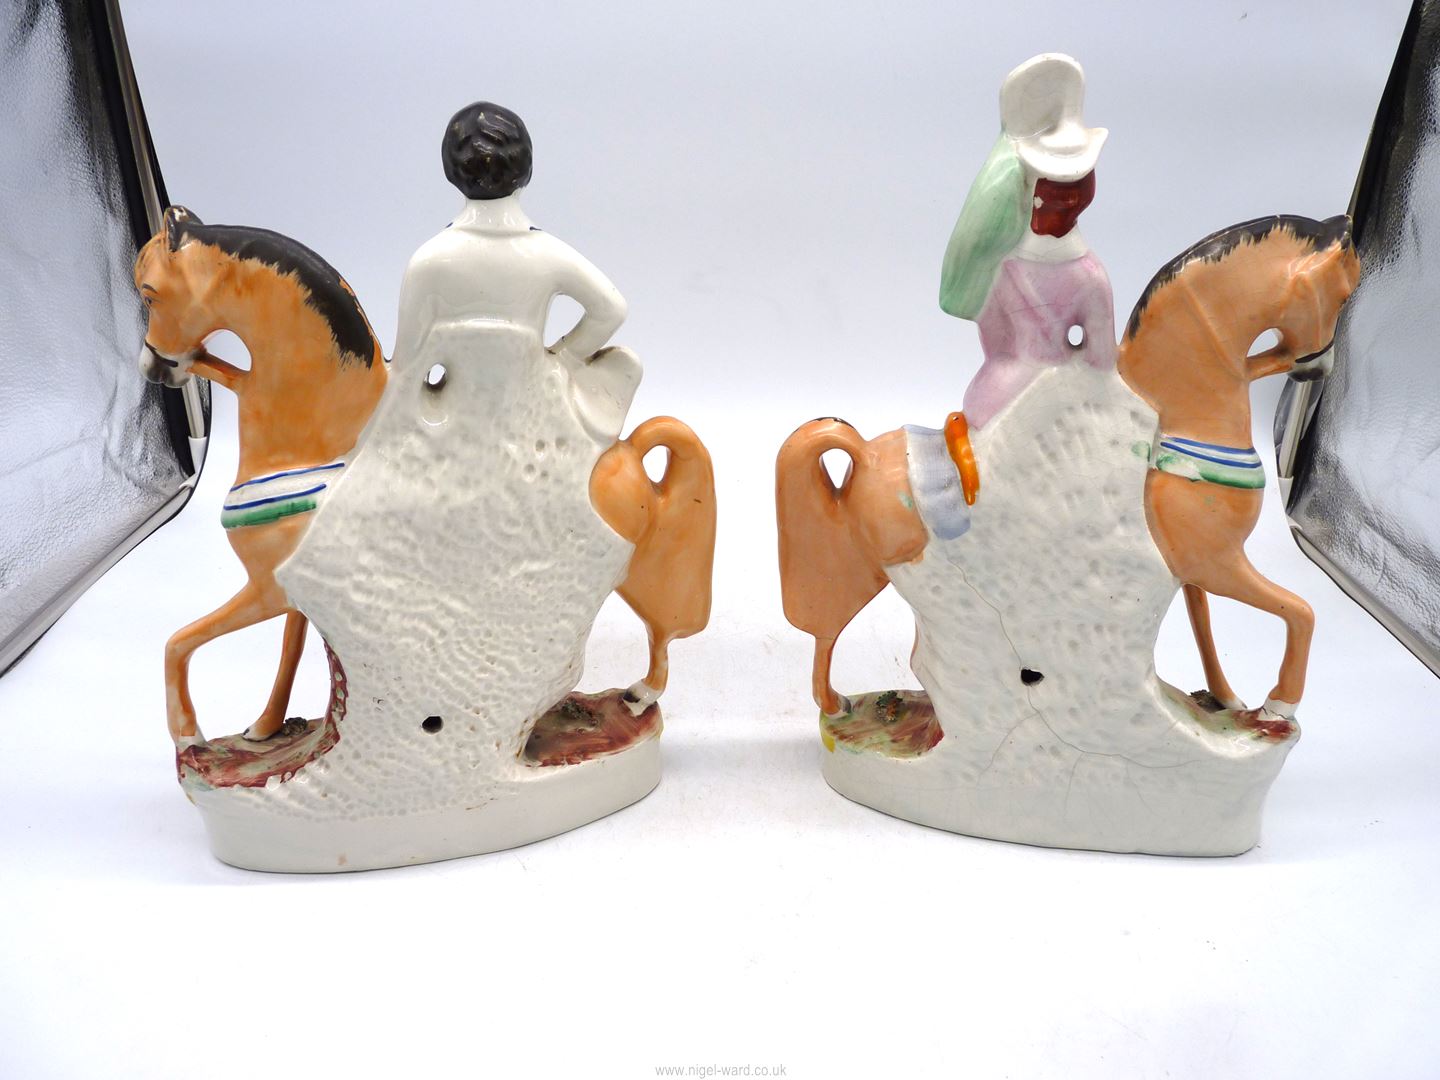 A pair of Staffordshire figures on horseback - 'Prince of Wales' and 'Princess' (a/f), 13 1/2" tall. - Image 4 of 5